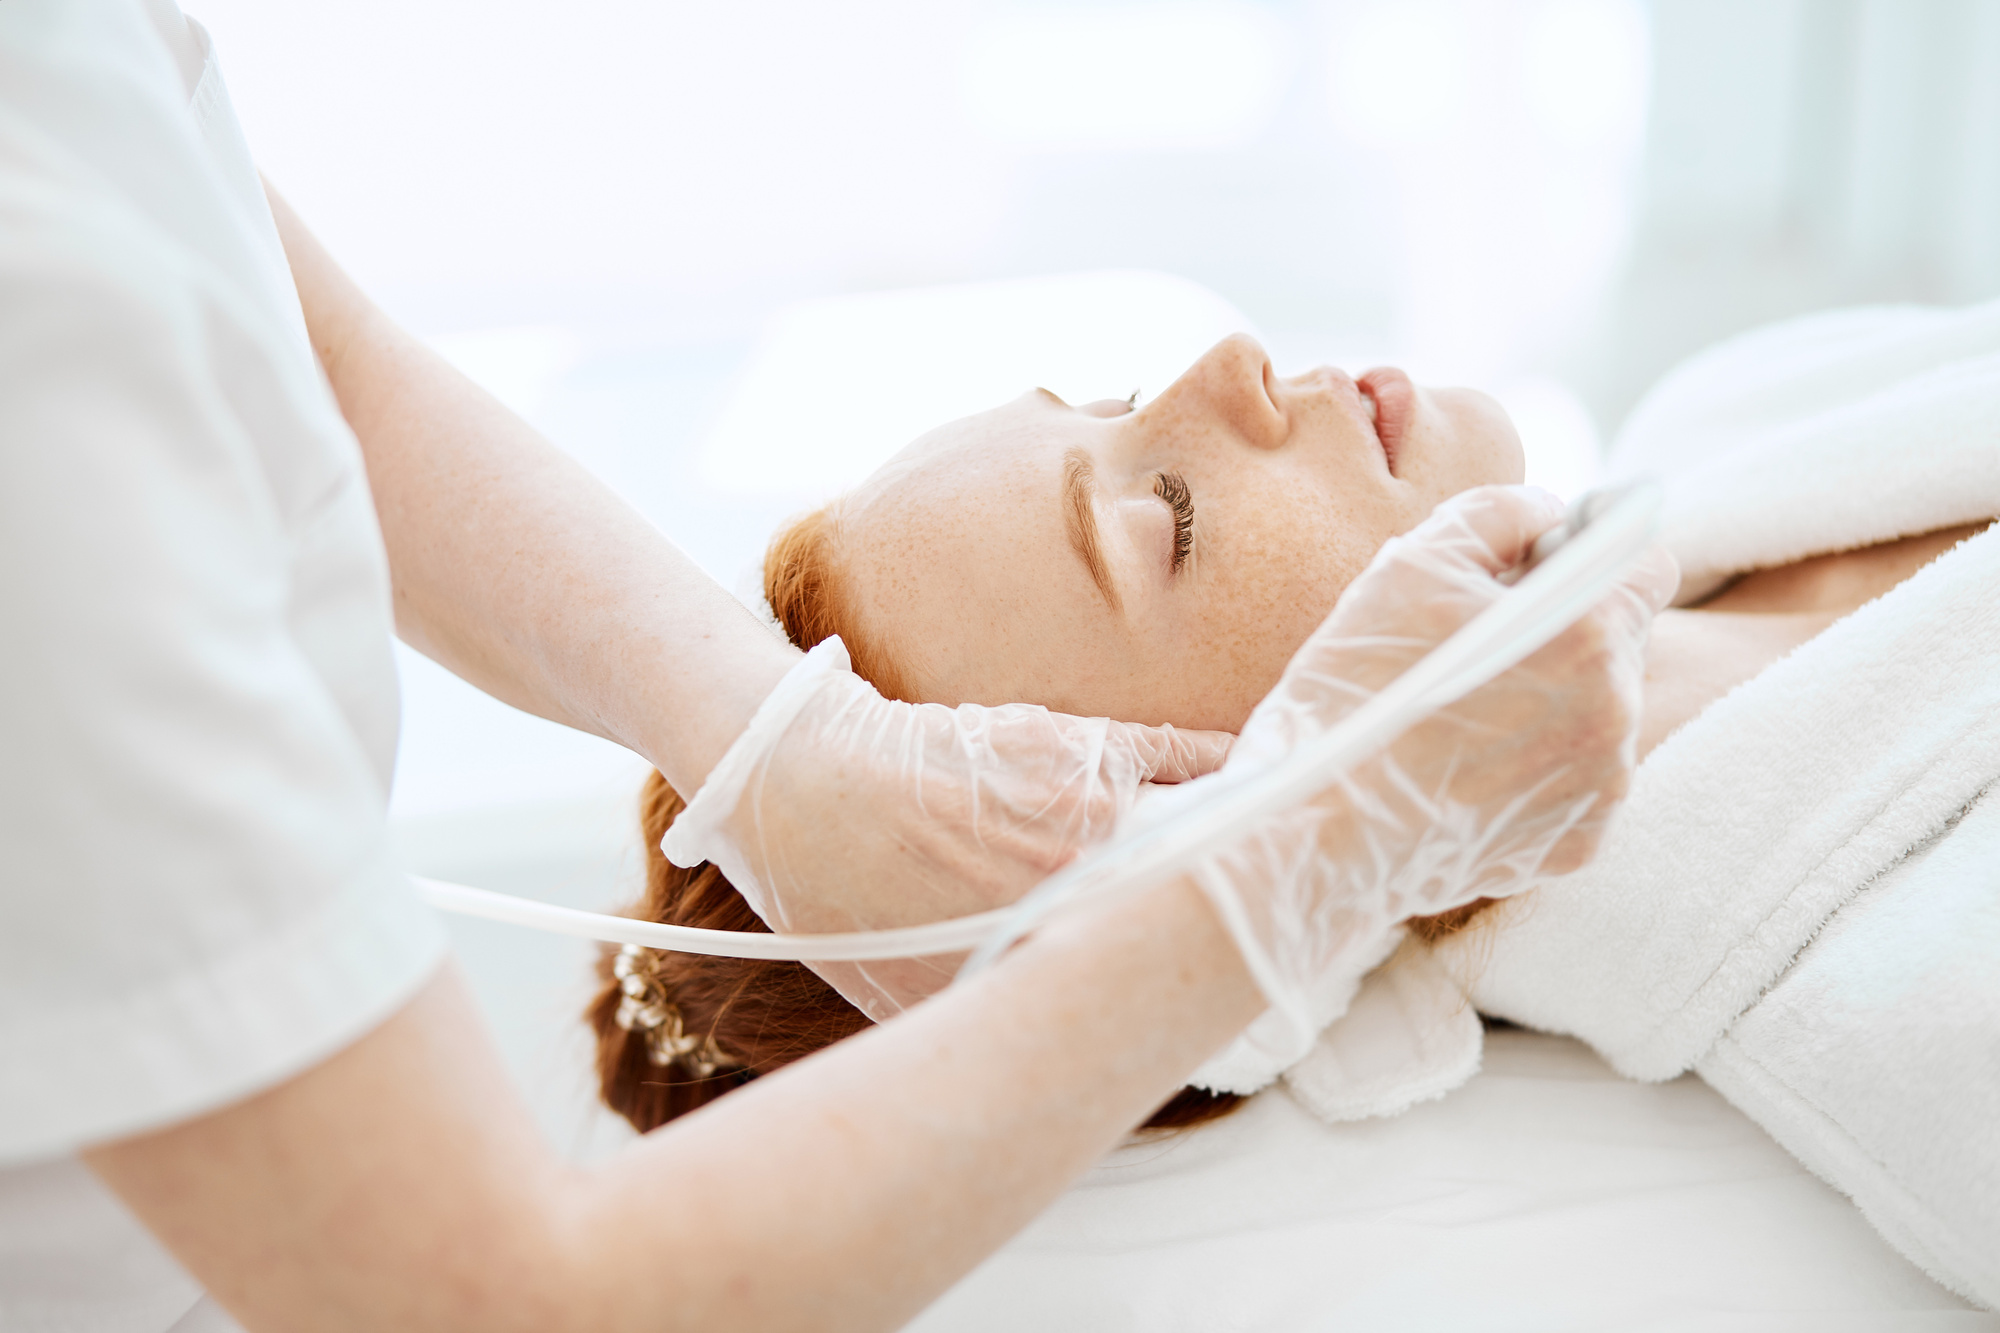 What Is a Chemical Peel? A Brief Guide